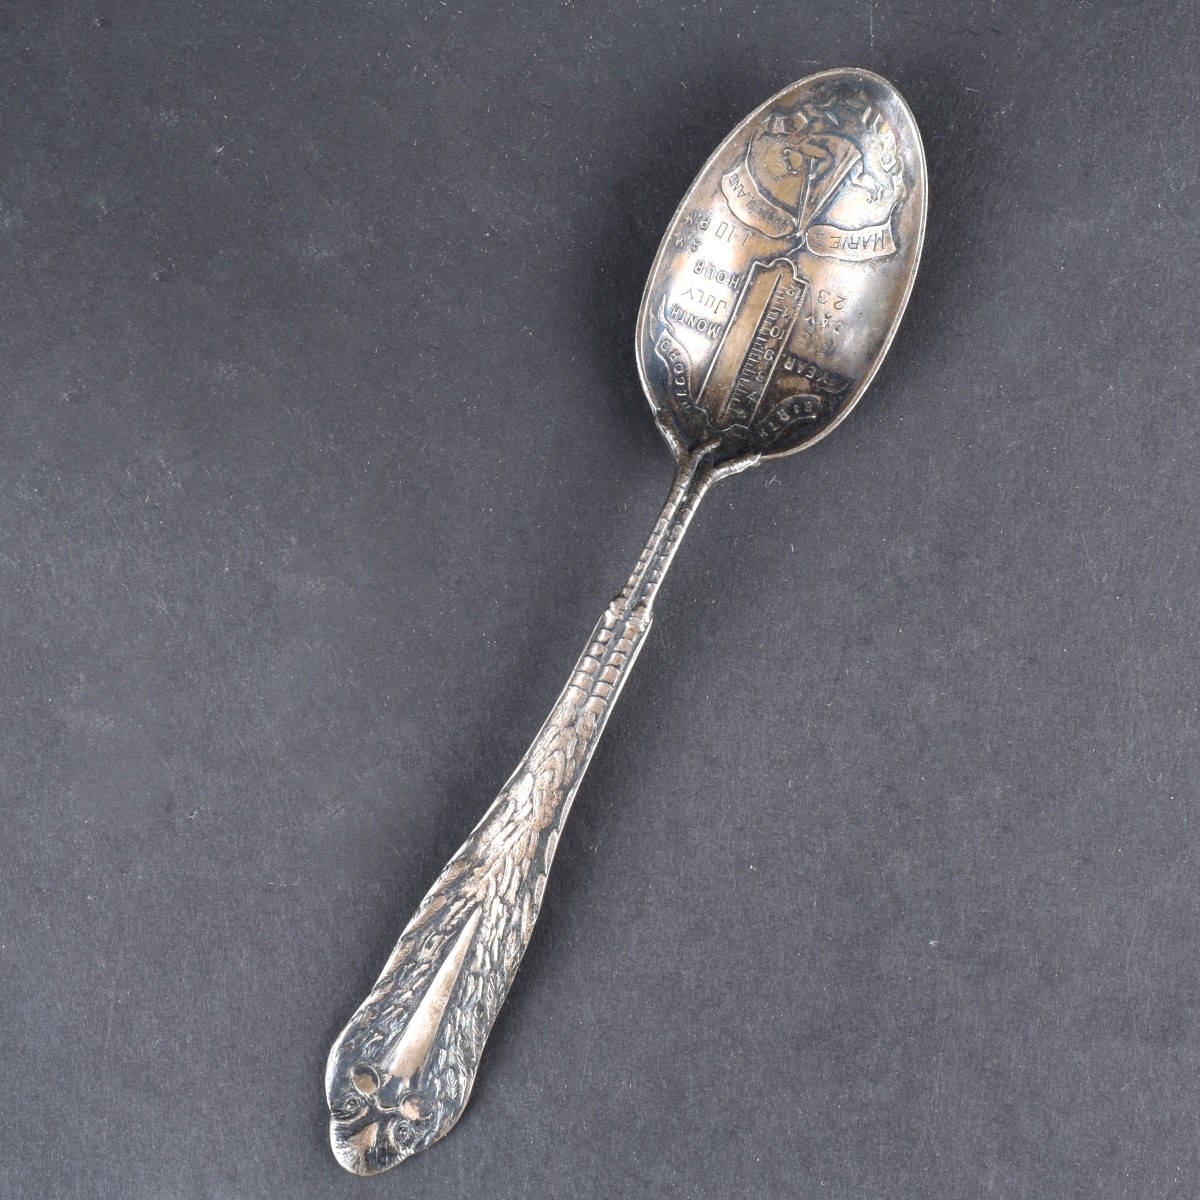 Six (6) Sterling Silver Spoons